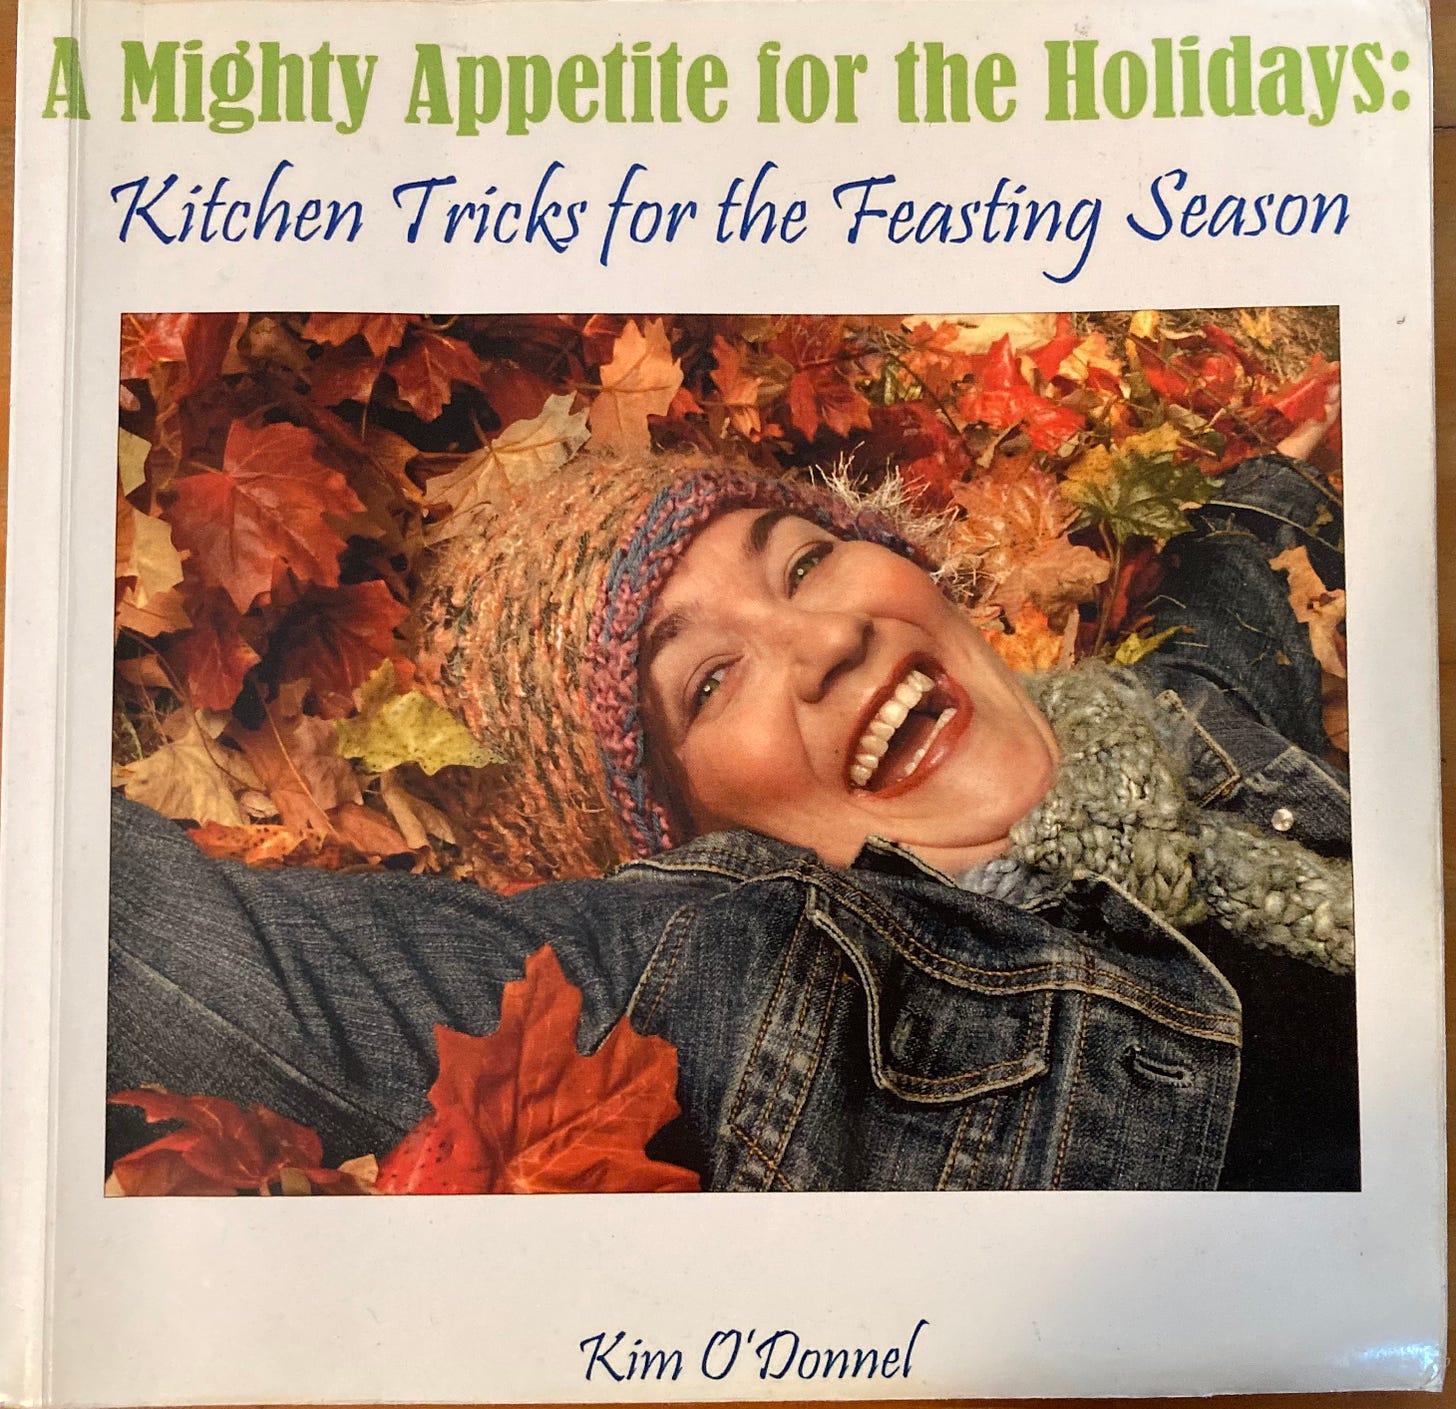 Cover of Kim O'Donnel's self-published book A Mighty Appetite for the Holidays